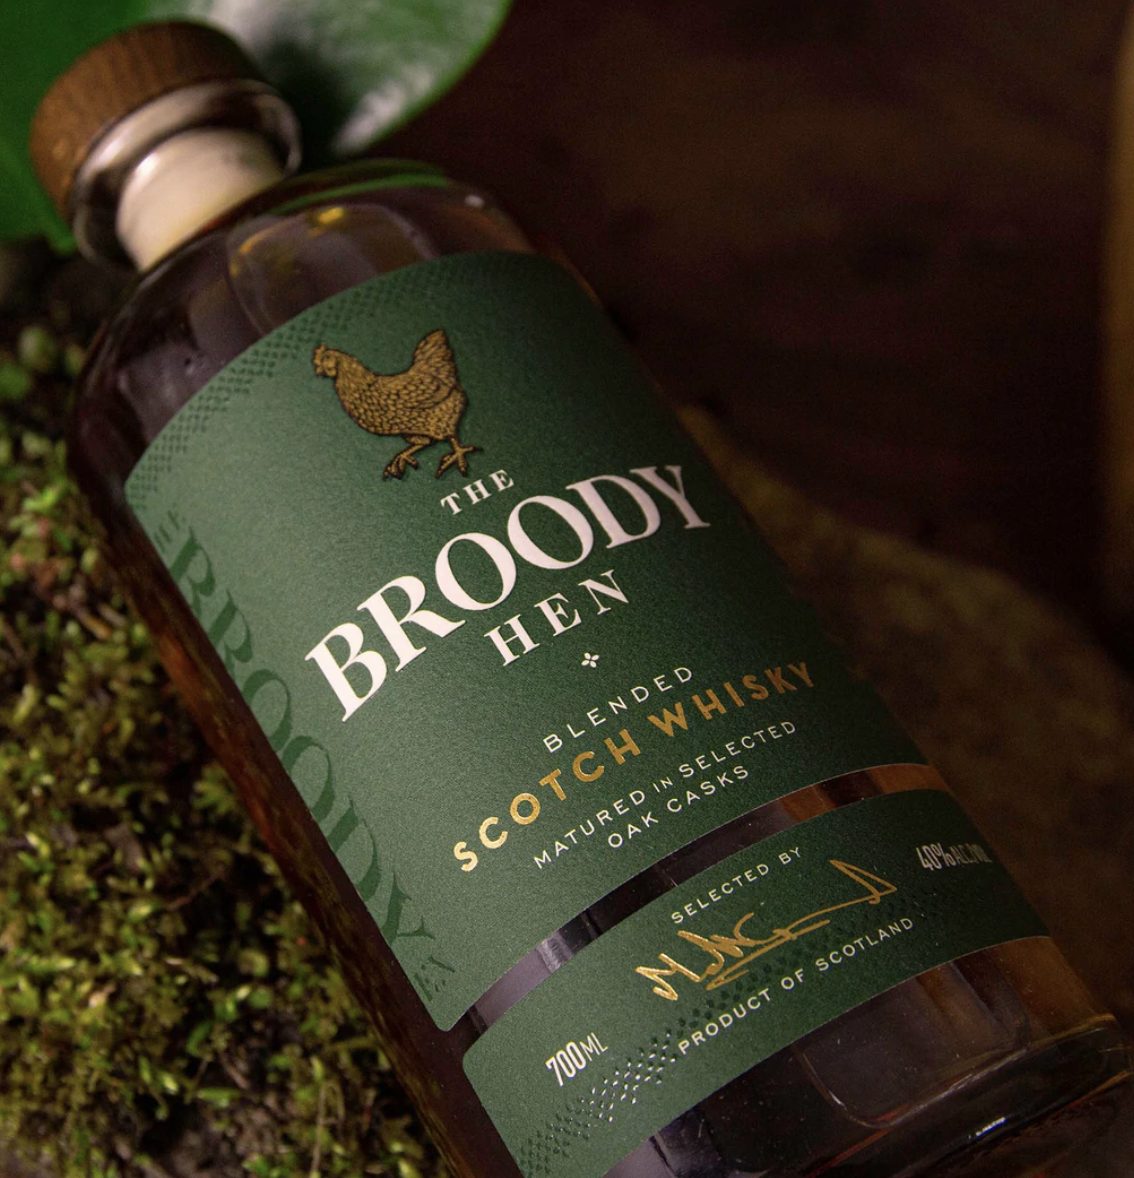 The Broody Hen blended scotch whisky Pickering's gin Summerhall distillery